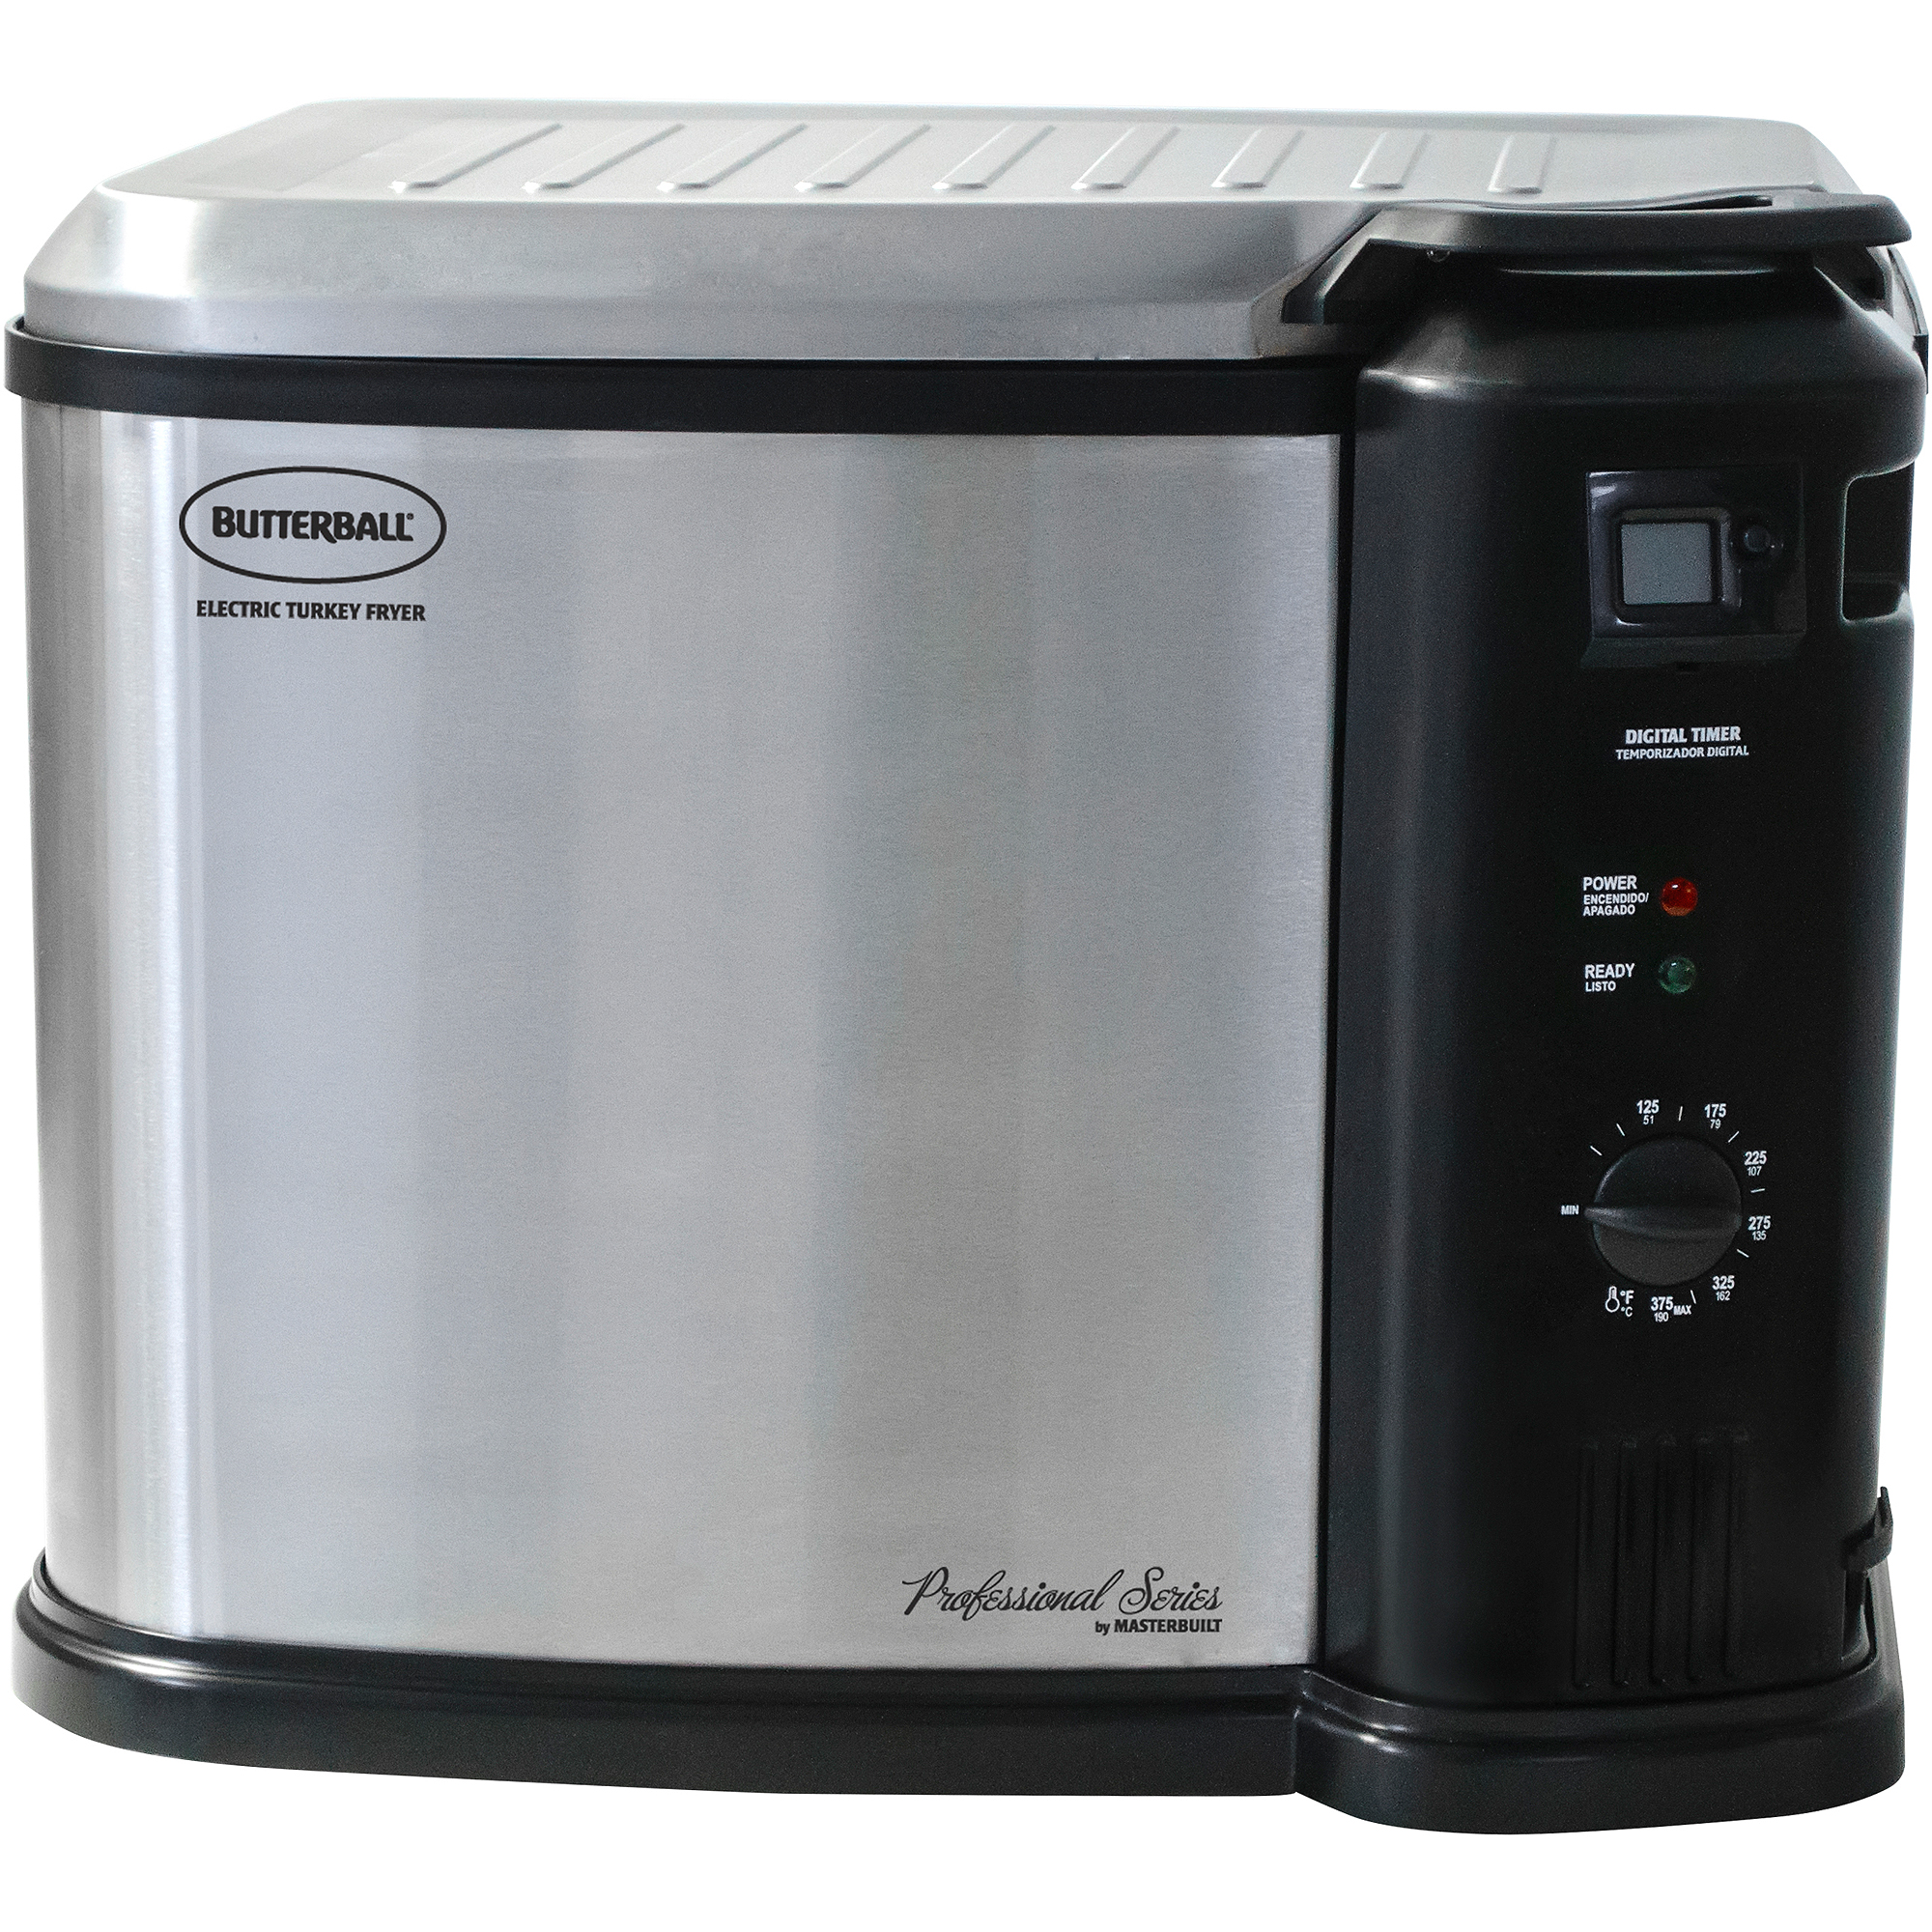 Butterball XL Electric Fryer, Stainless Steel, 2015 model - image 4 of 4